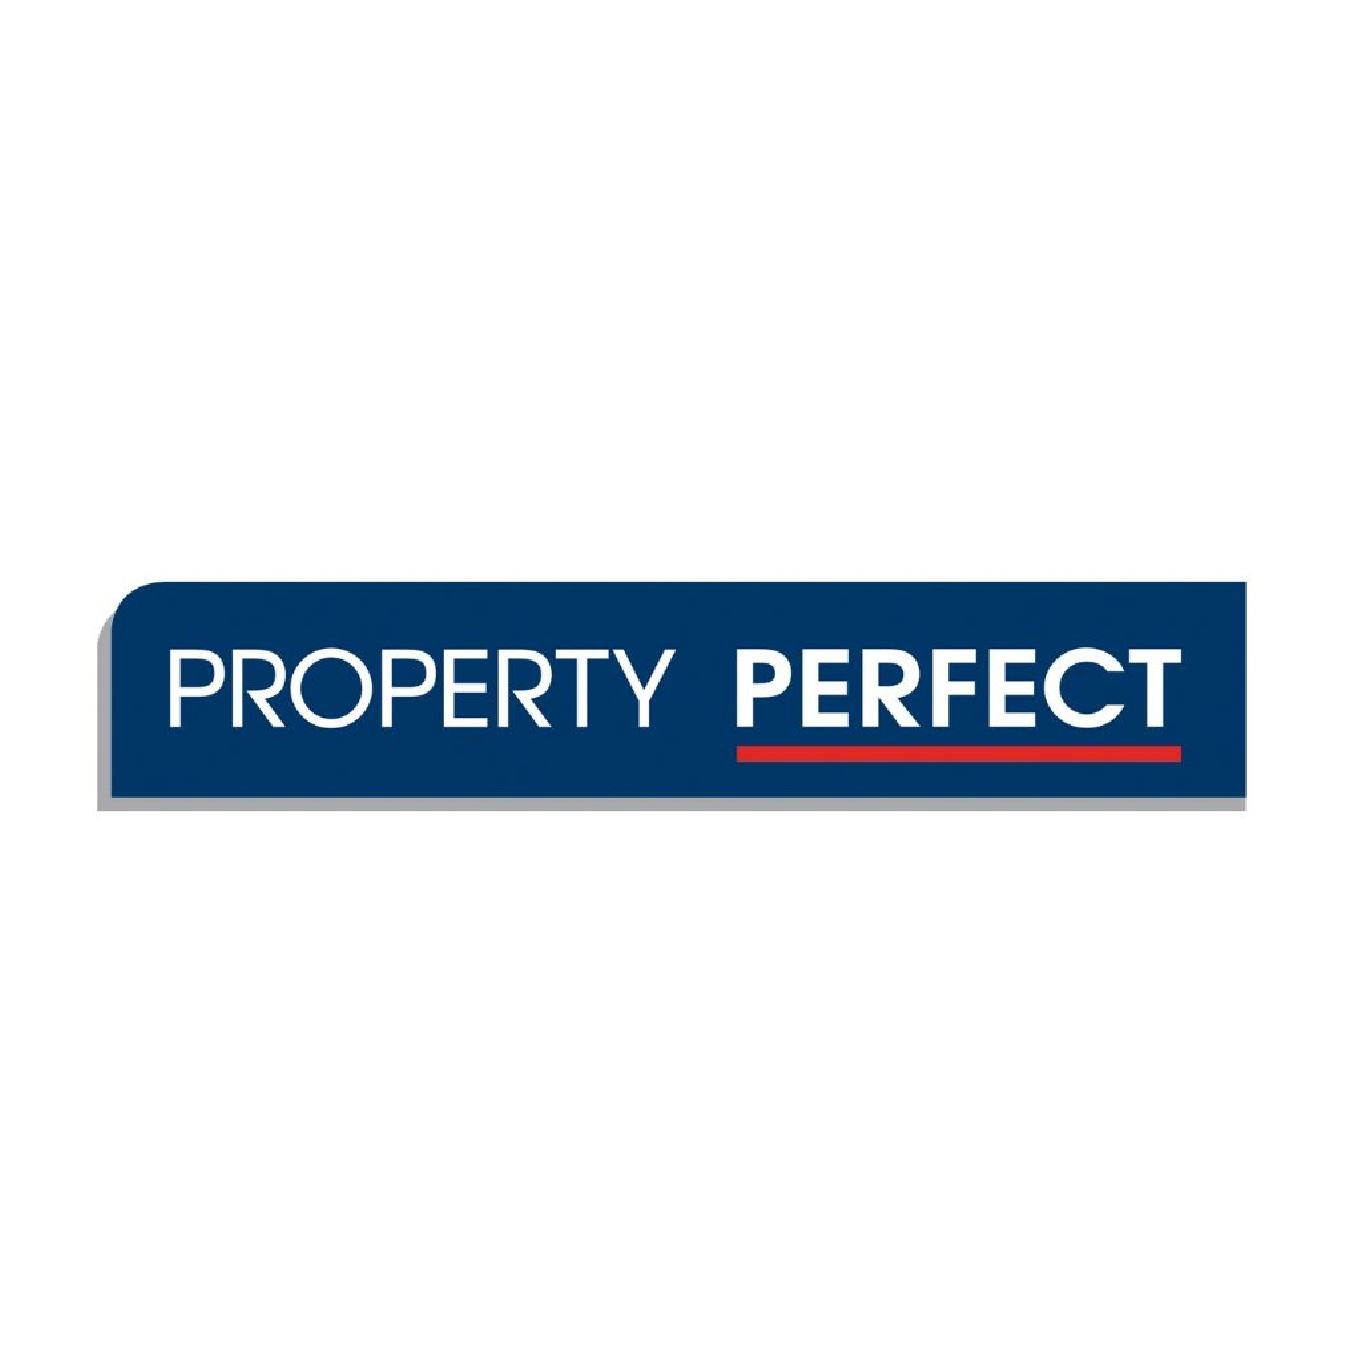 PROPERTY PERFECT